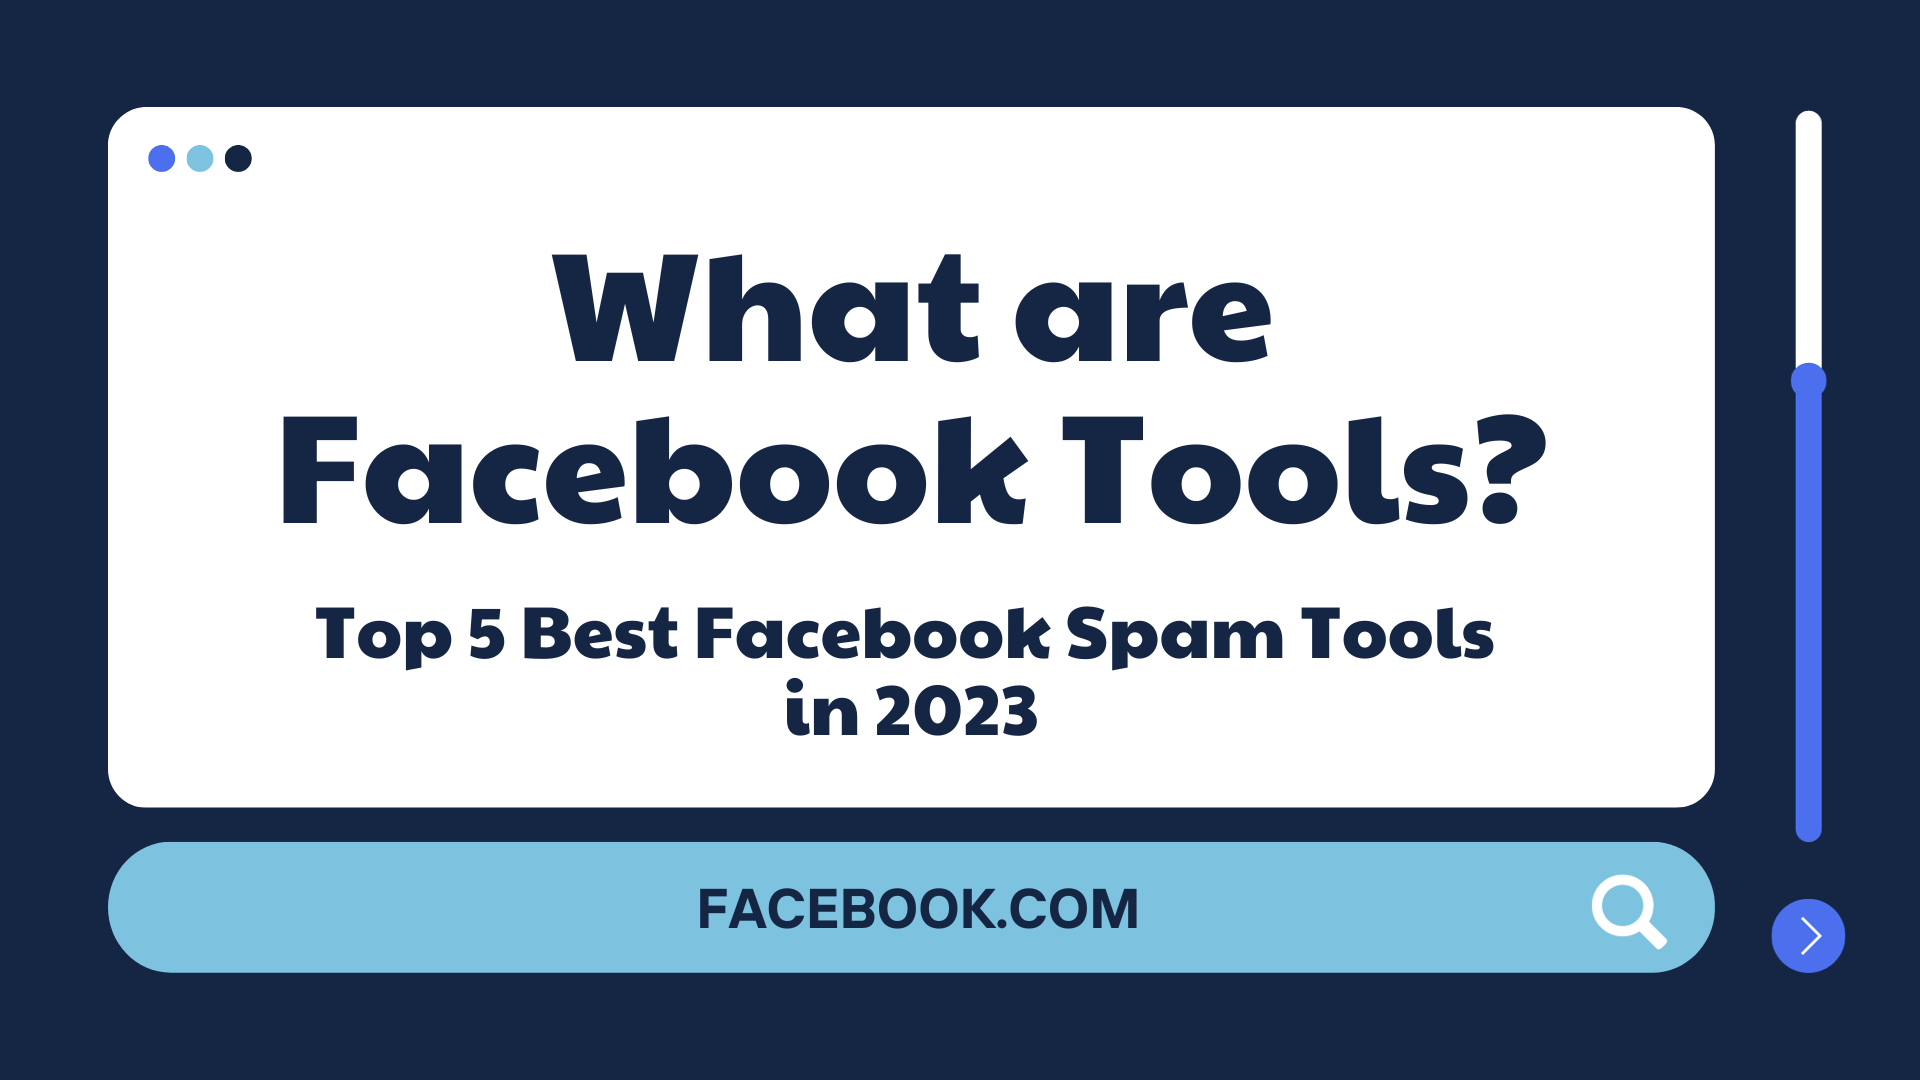 What are Facebook Tools? Top 5 Best Facebook Spam Tools in 2023